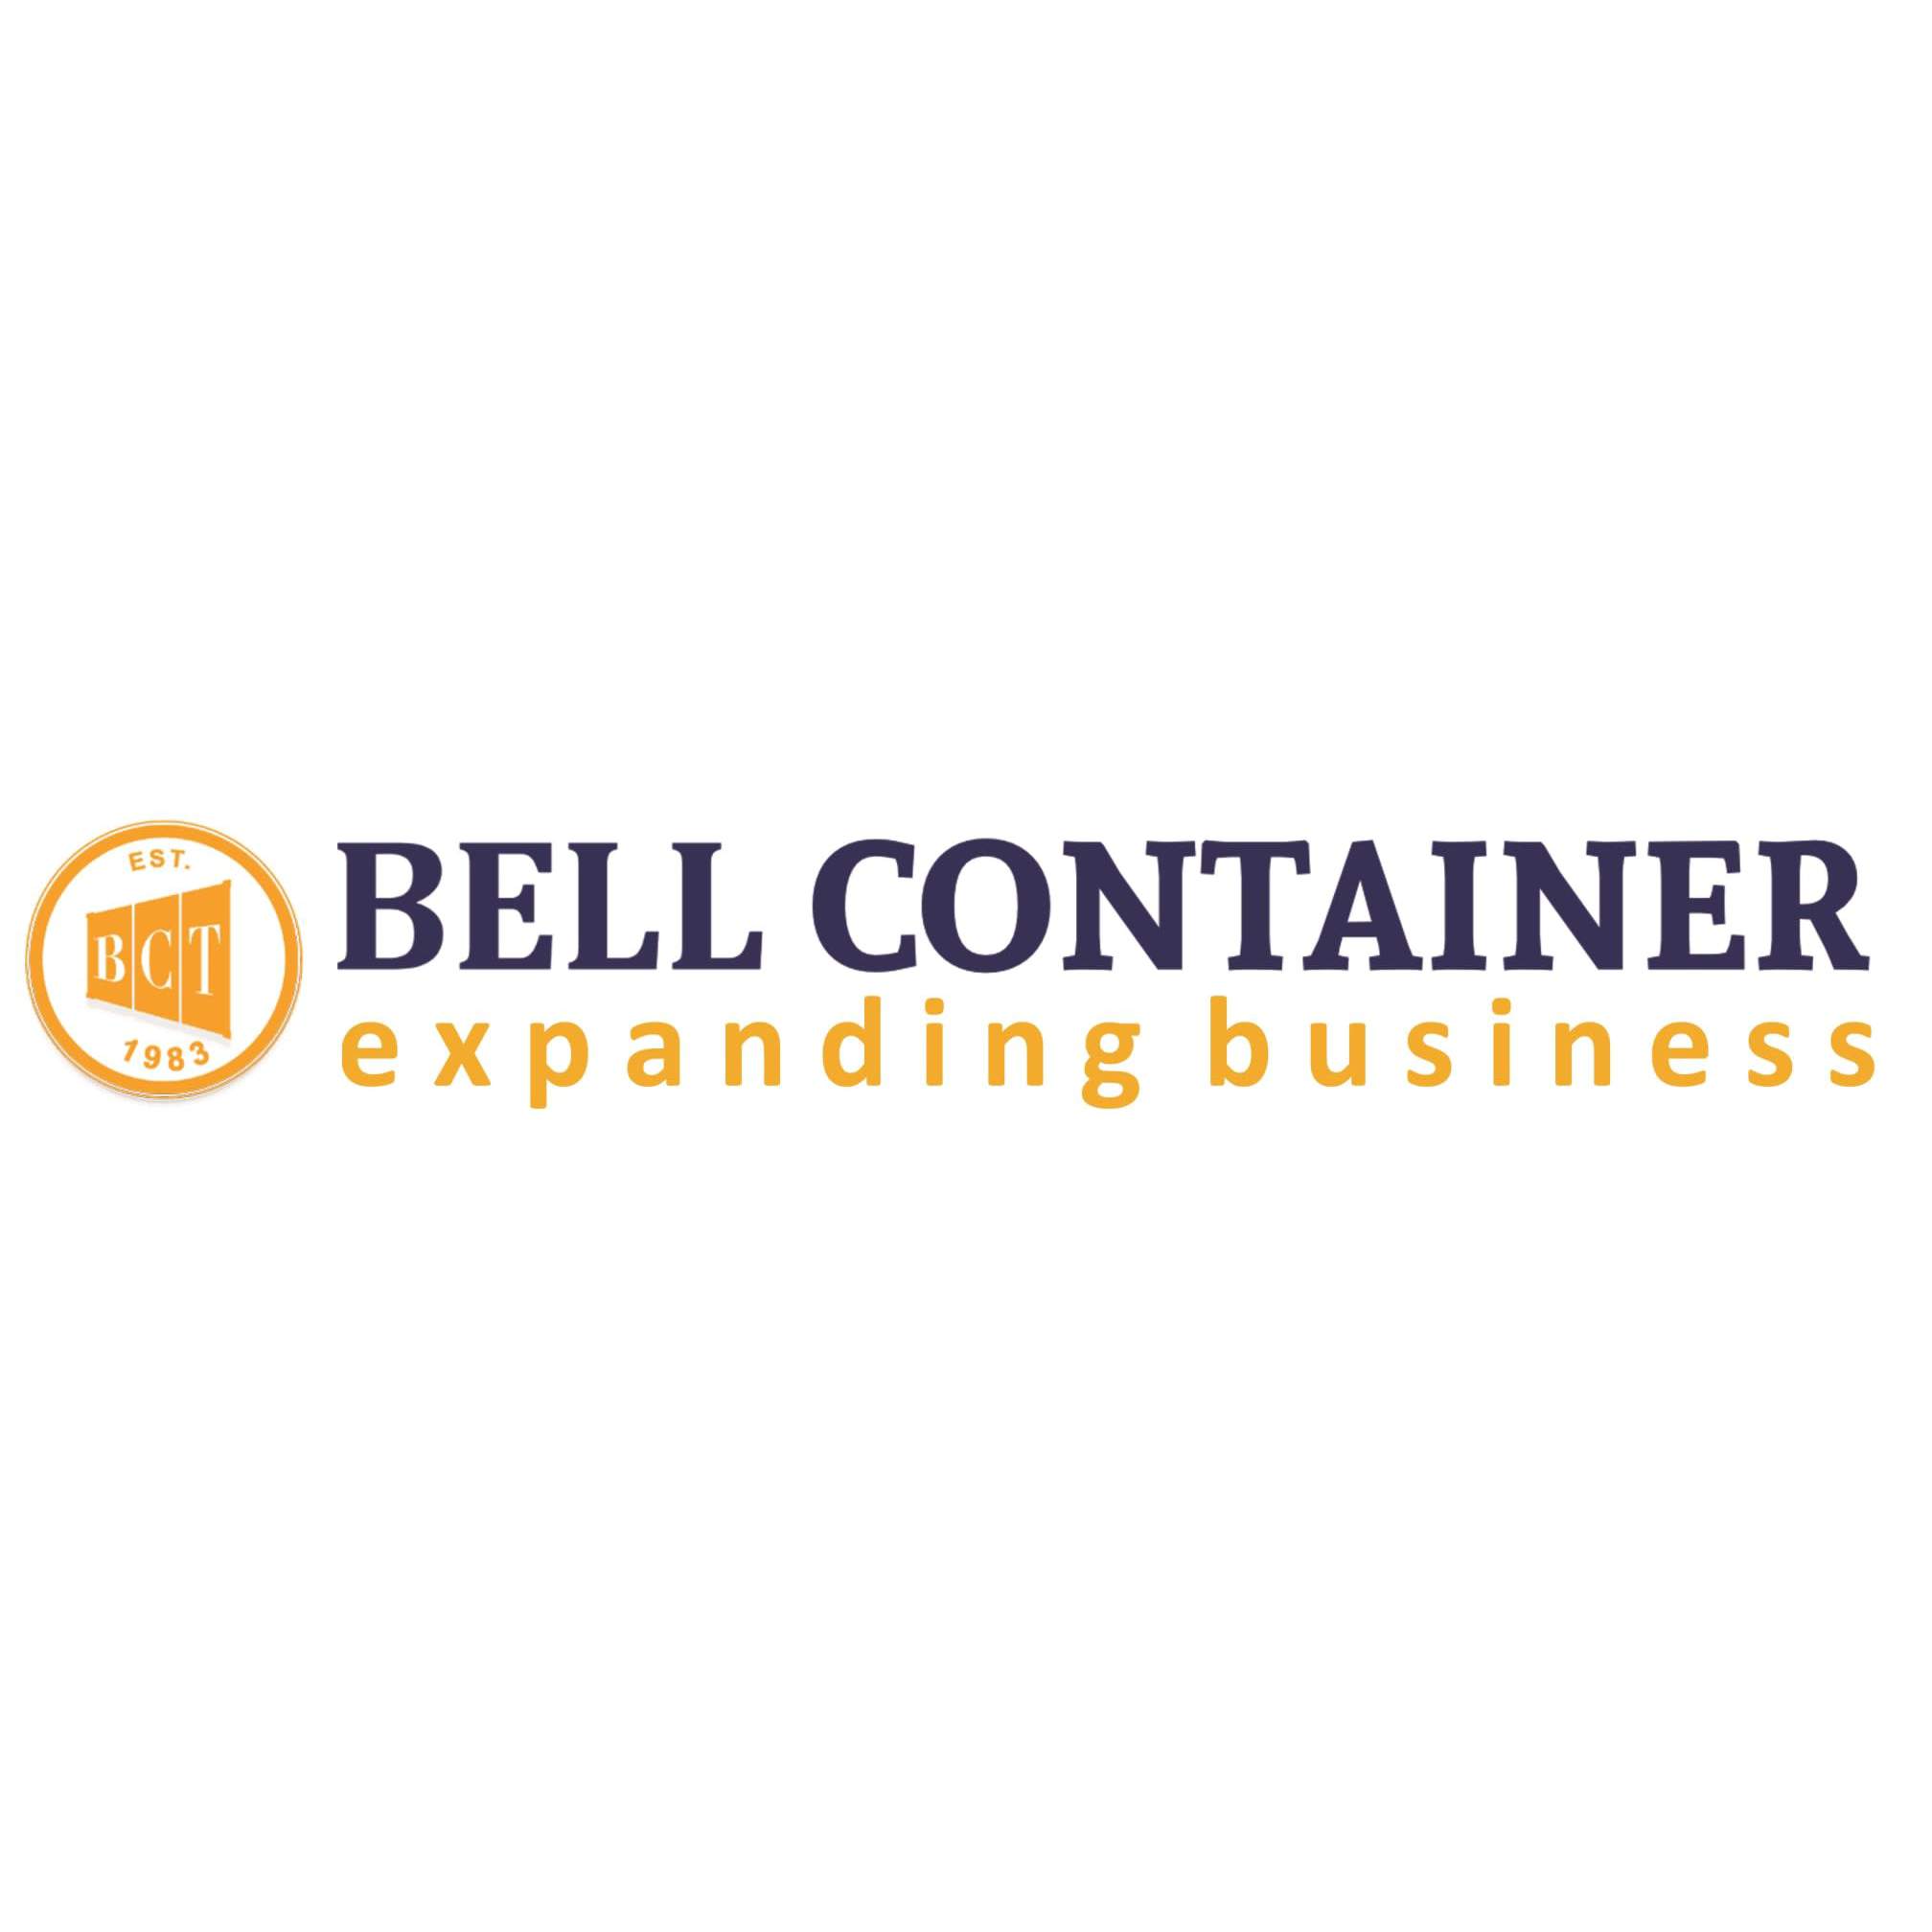 Bell Container Trading Ltd Logo